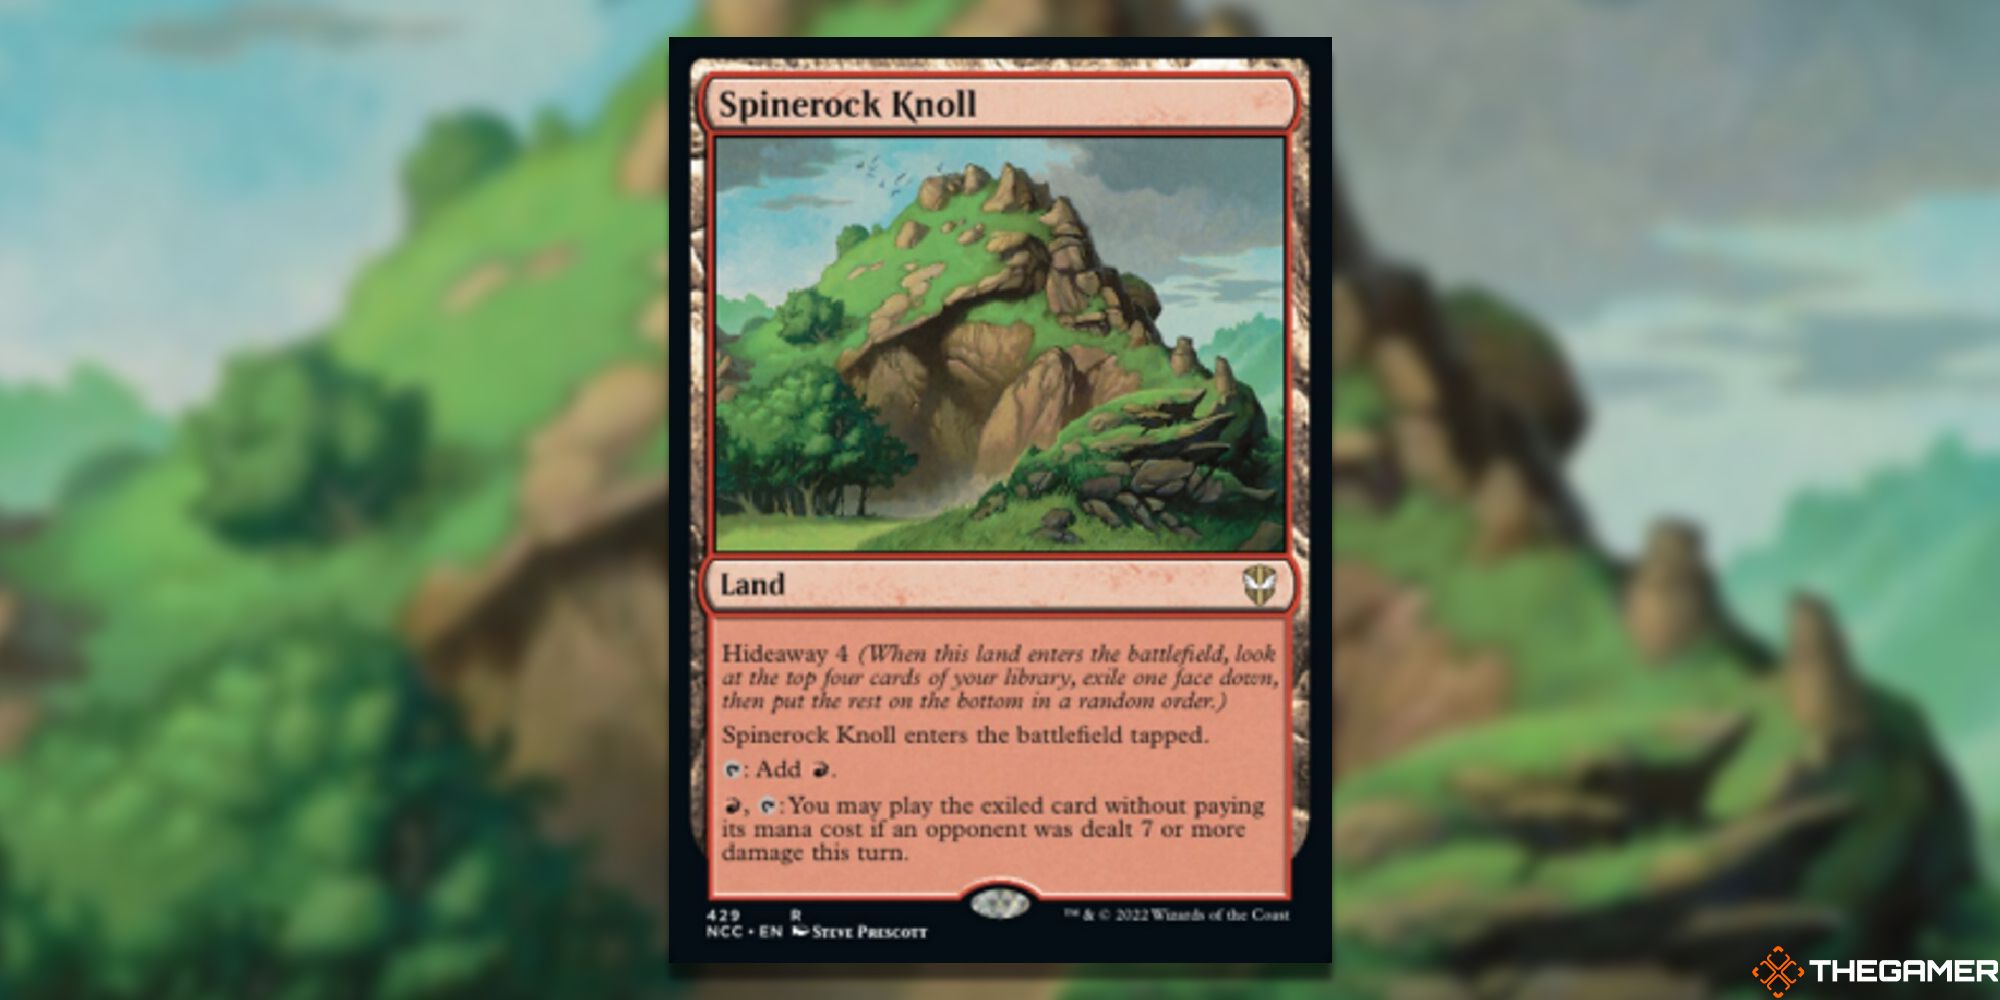 Spinerock Knoll full card with background